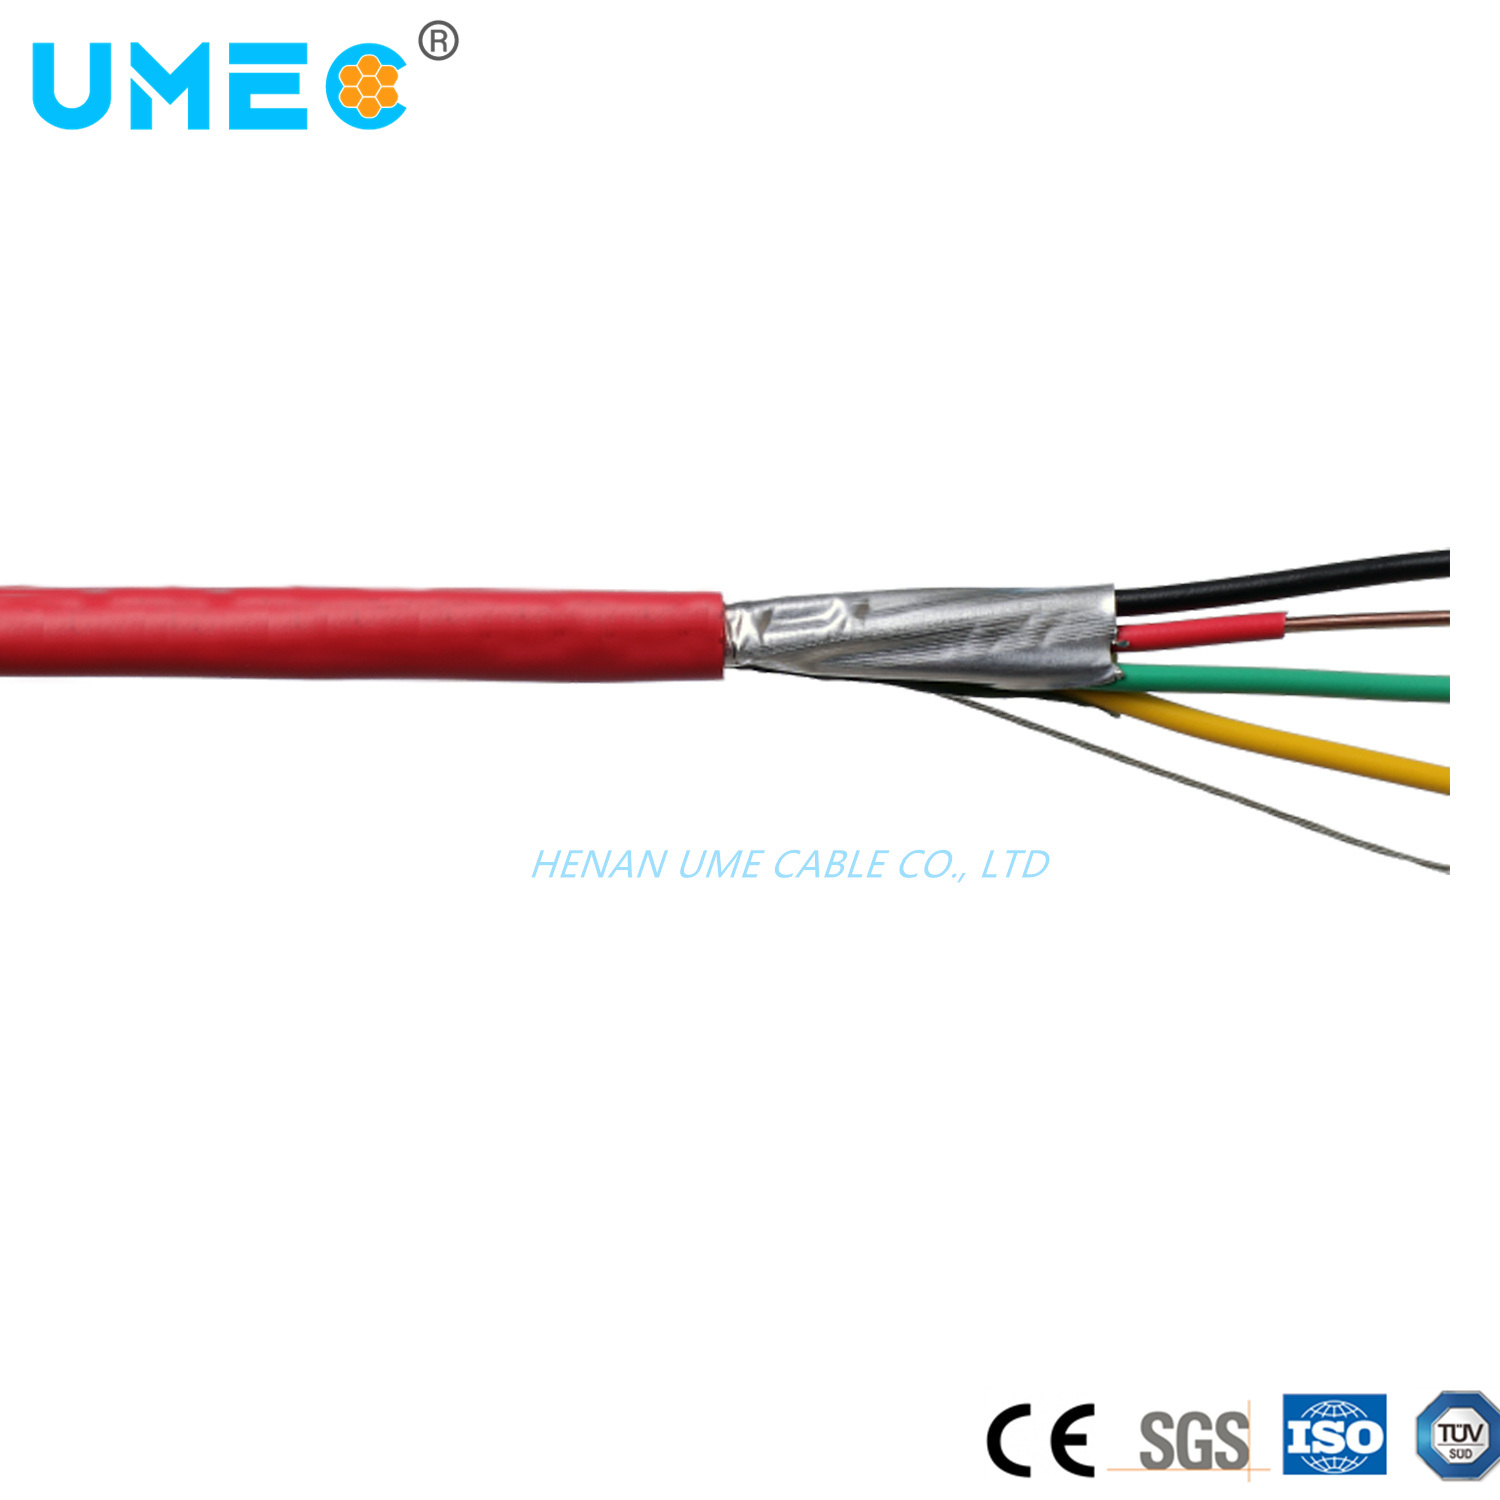 18 AWG Solid Fplr Riser Rated Shielded Fire Alarm Cable